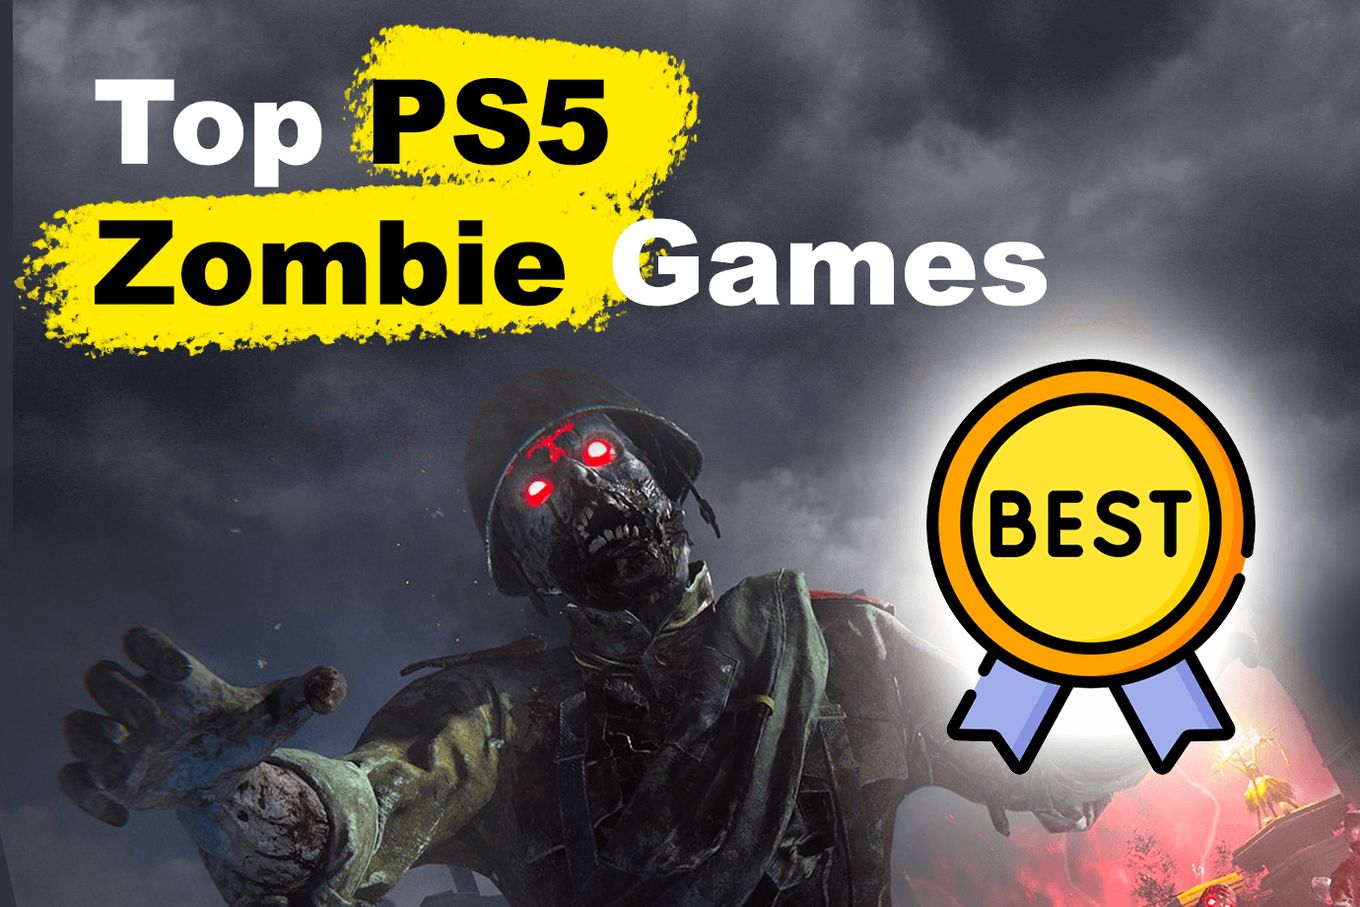 Top 23 PS5 Zombie Games in 2023 Ranked and Reviewed!